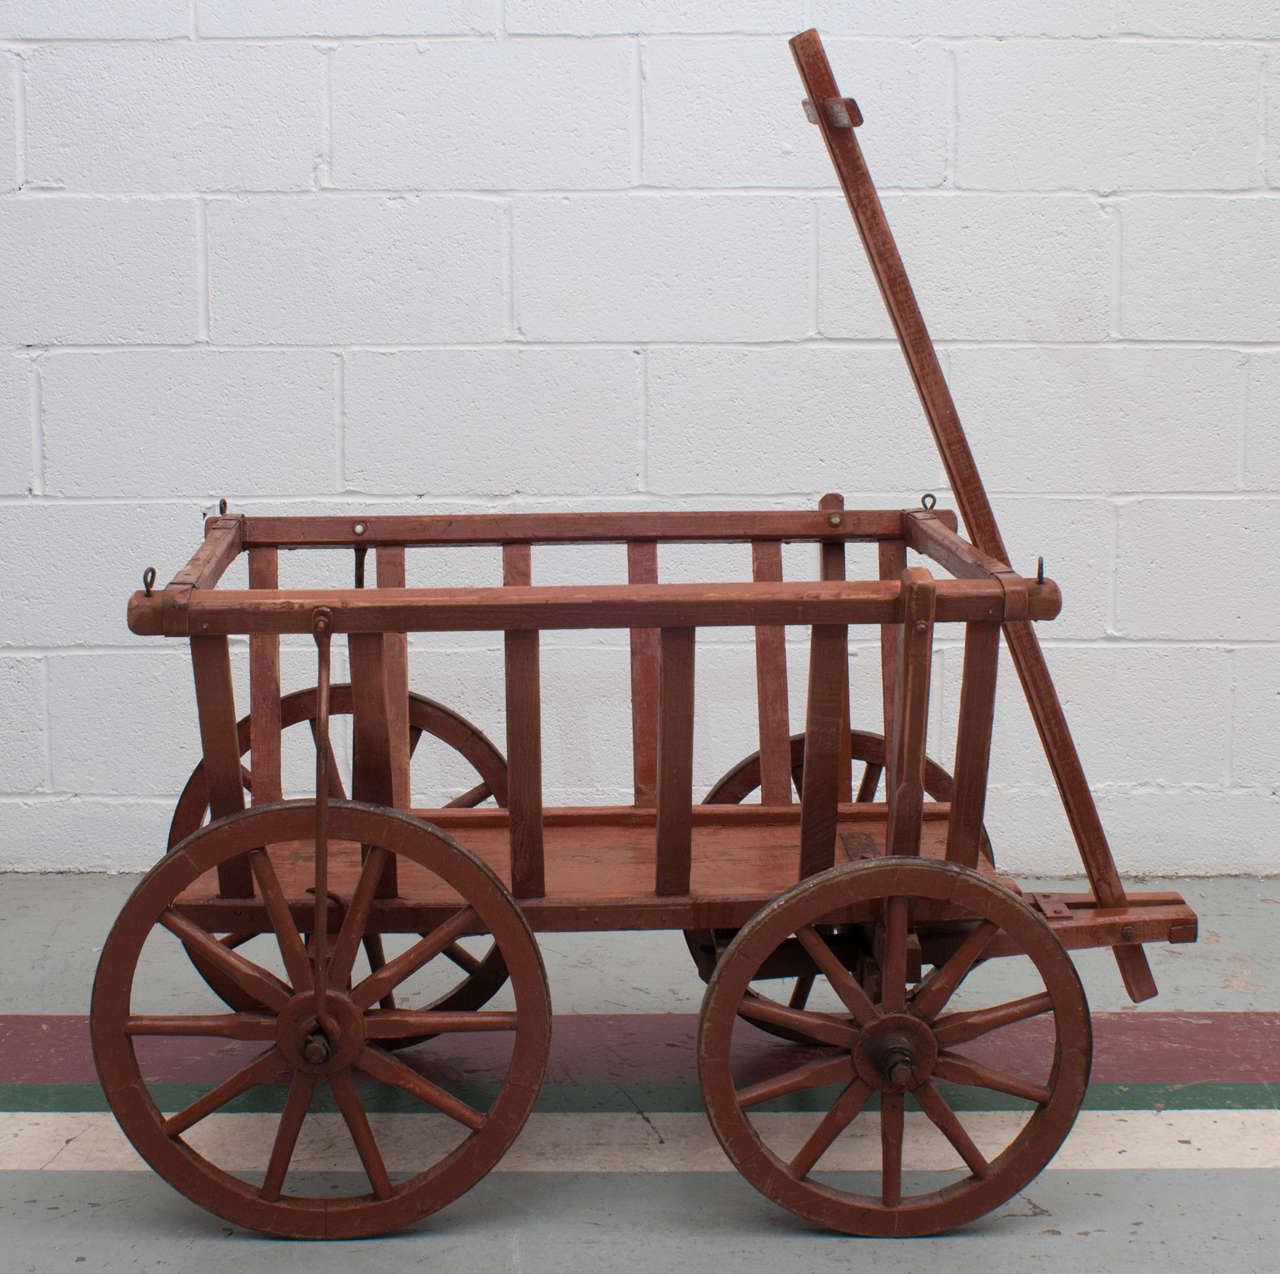 A great goat cart, complete, in excellent working order and entirely original. This piece has many indoor and outdoor decorative or functional uses. In worn original barn red paint.